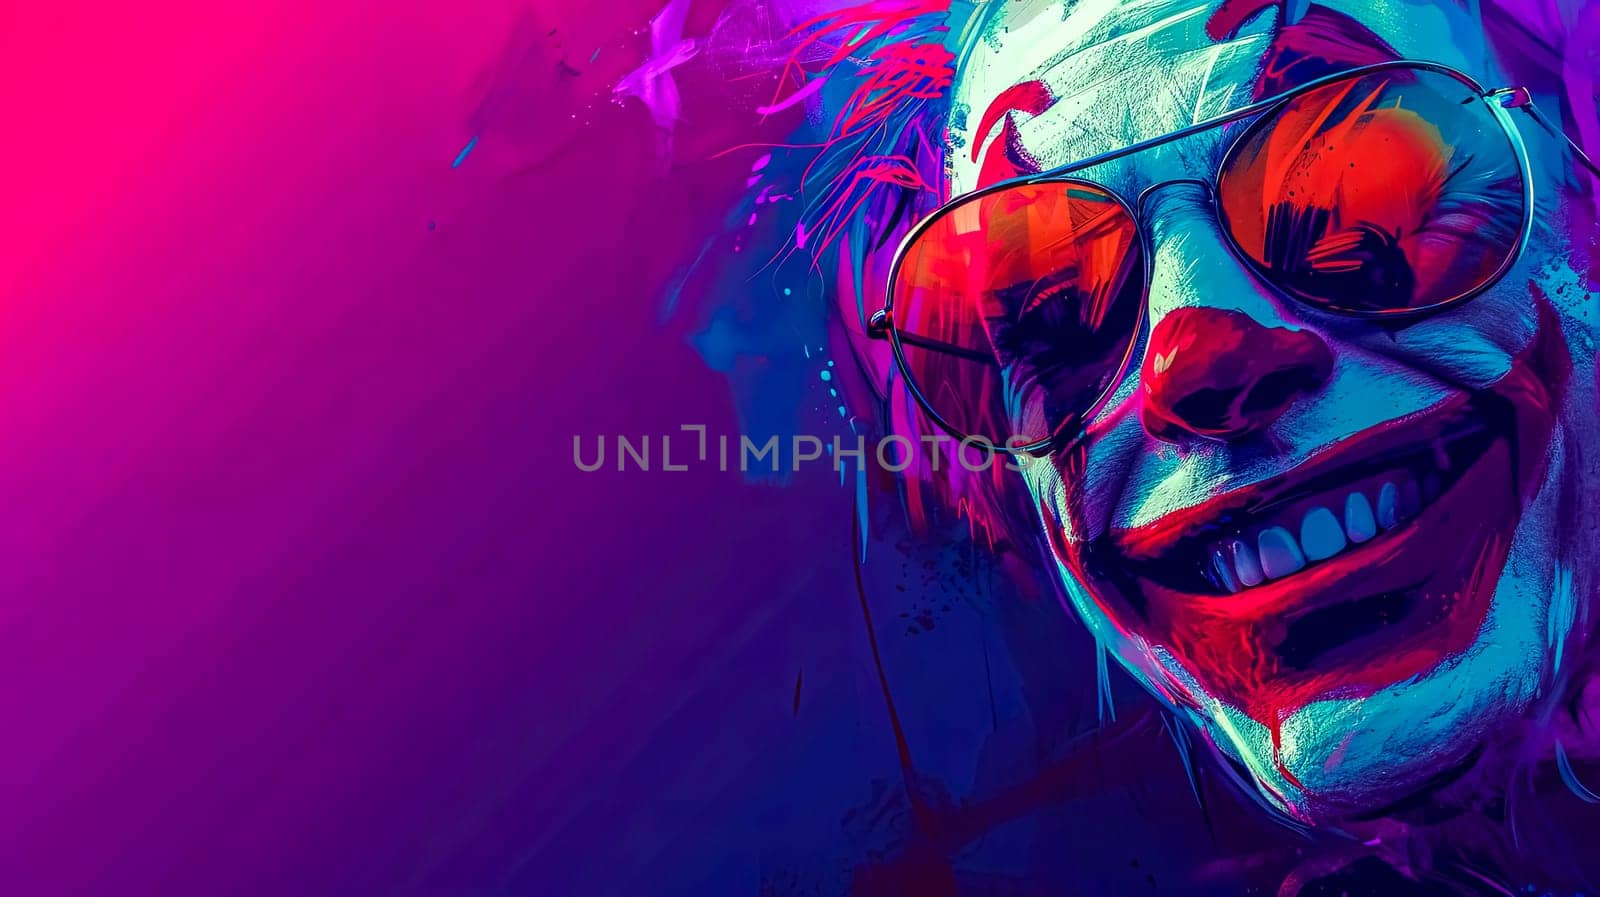 A neon-drenched, psychedelic portrait of a person wearing sunglasses, reflecting a vivid explosion of colors on a striking purple background. copy space